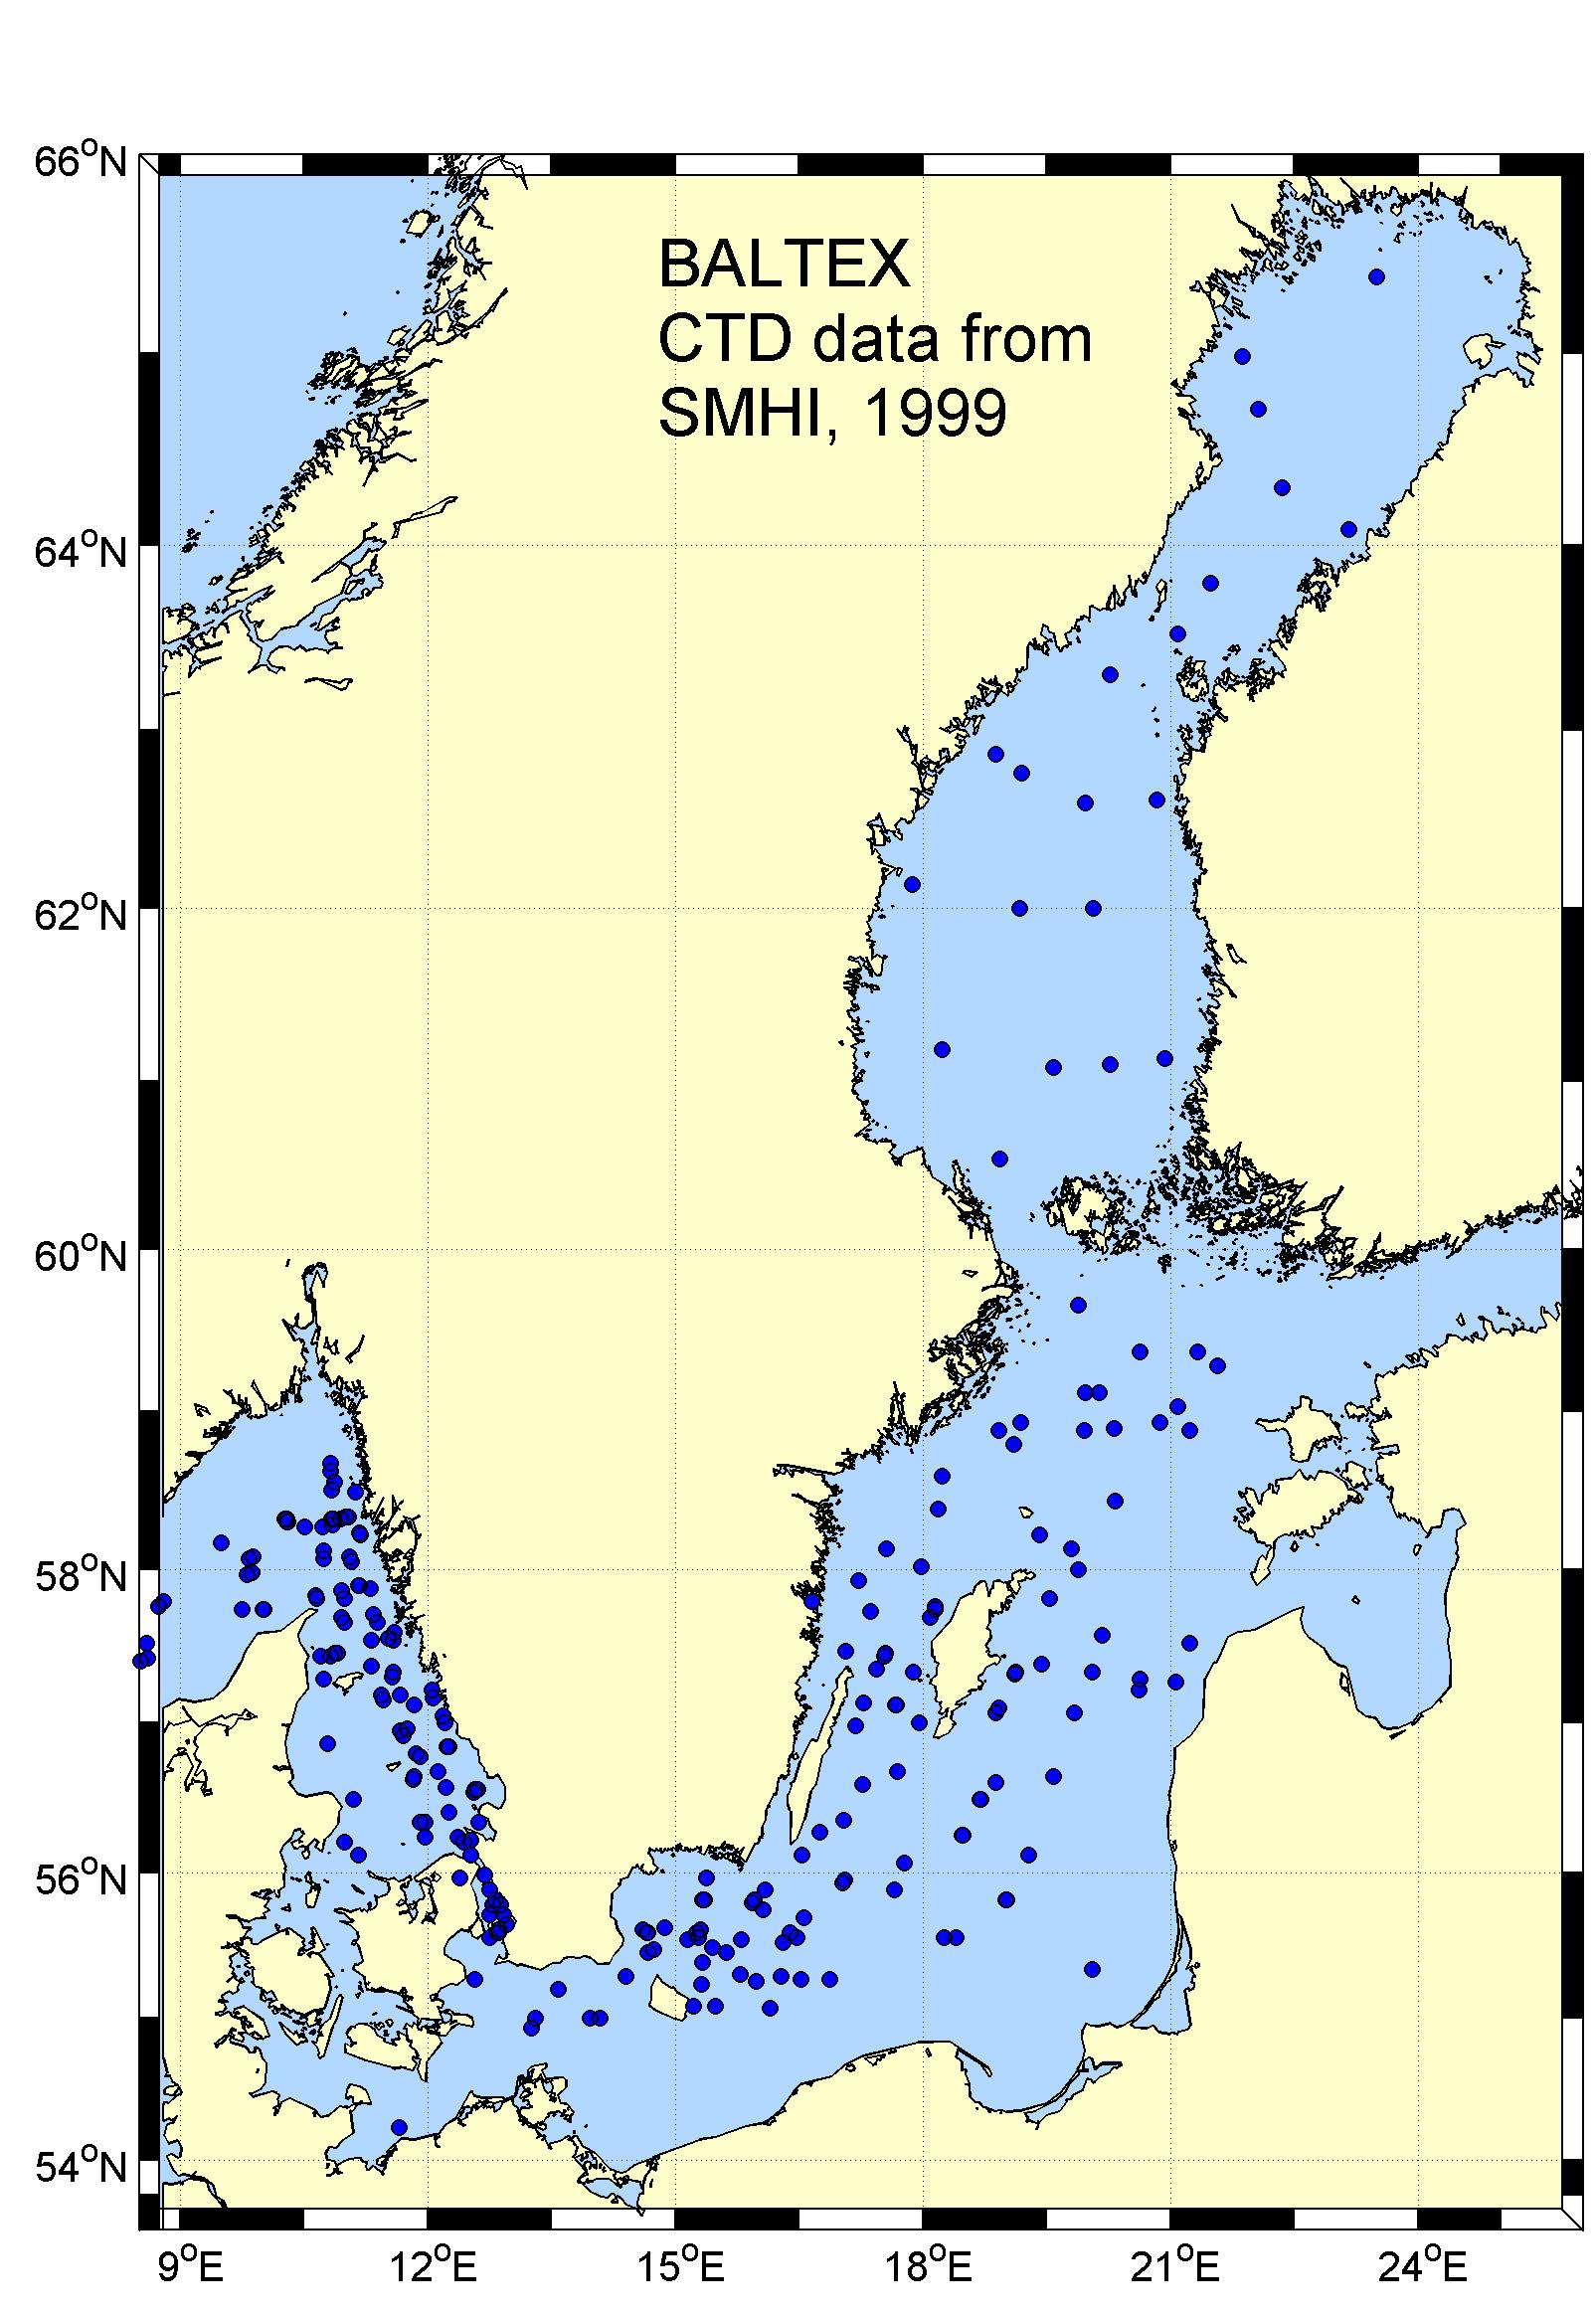 CTD cast data from SMHI, 1999